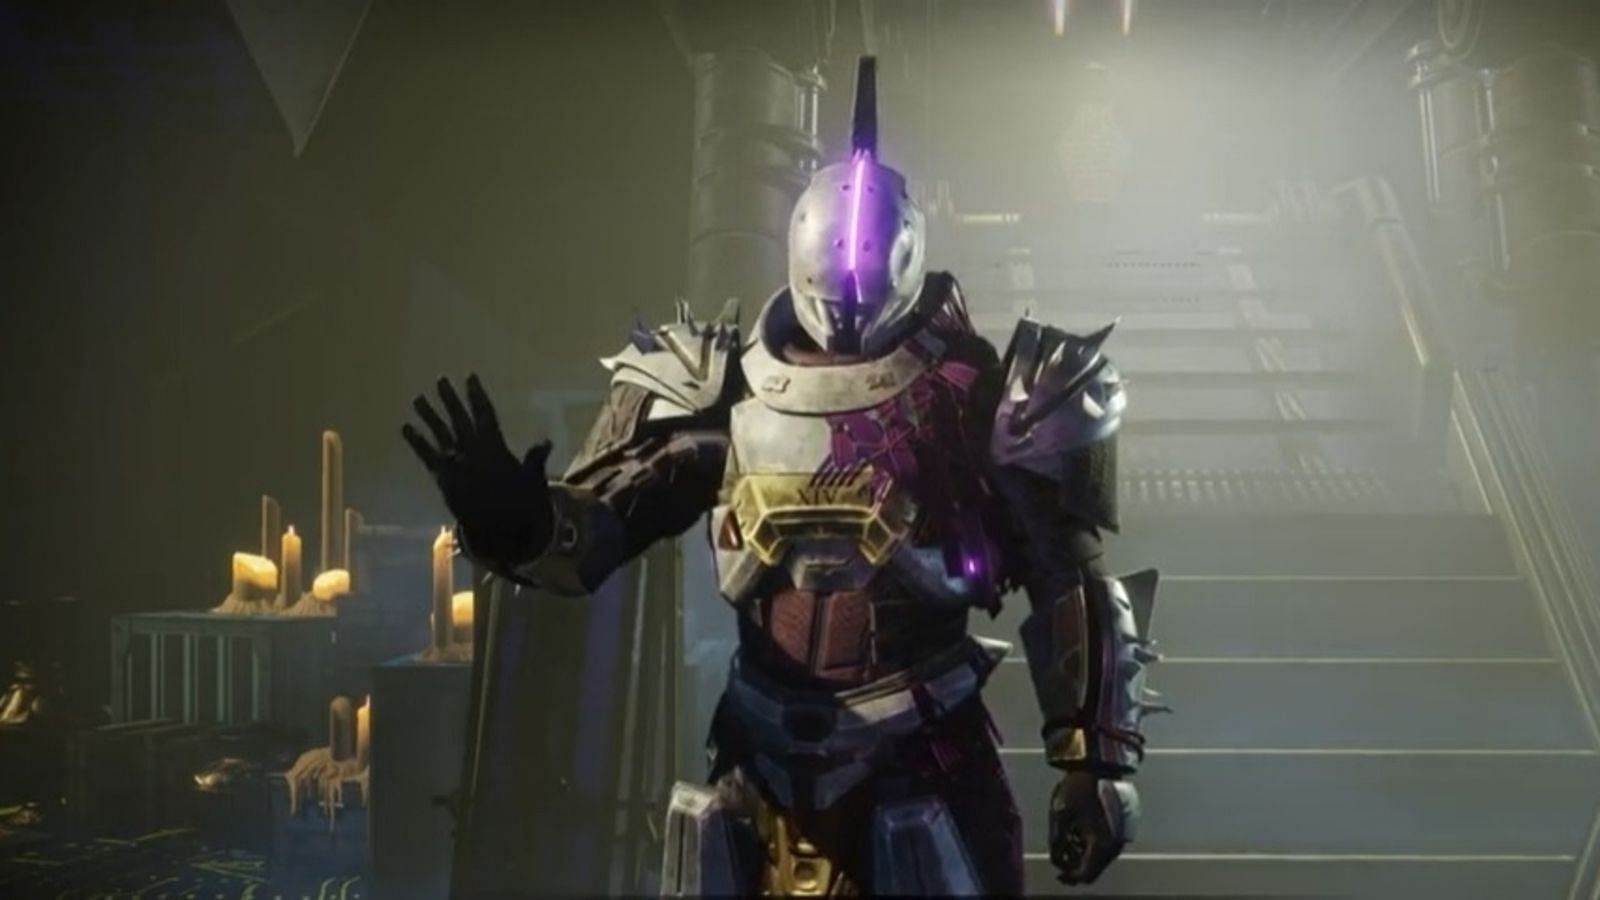 Saint-14 in the Hangar area of the Tower (Image via Destiny 2)